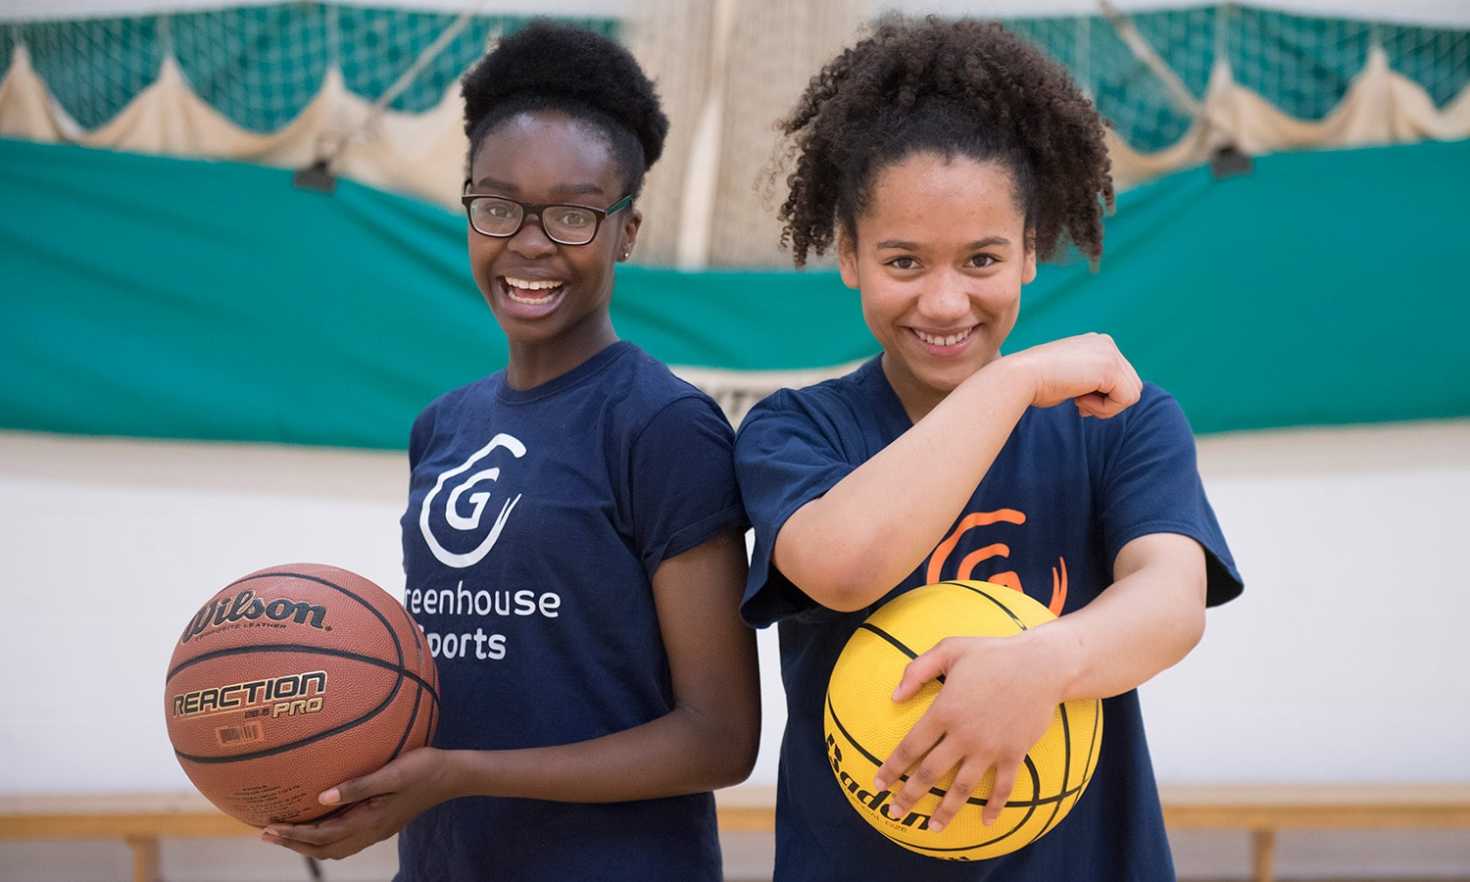 Basketball in Peckham with charity Greenhouse Sports